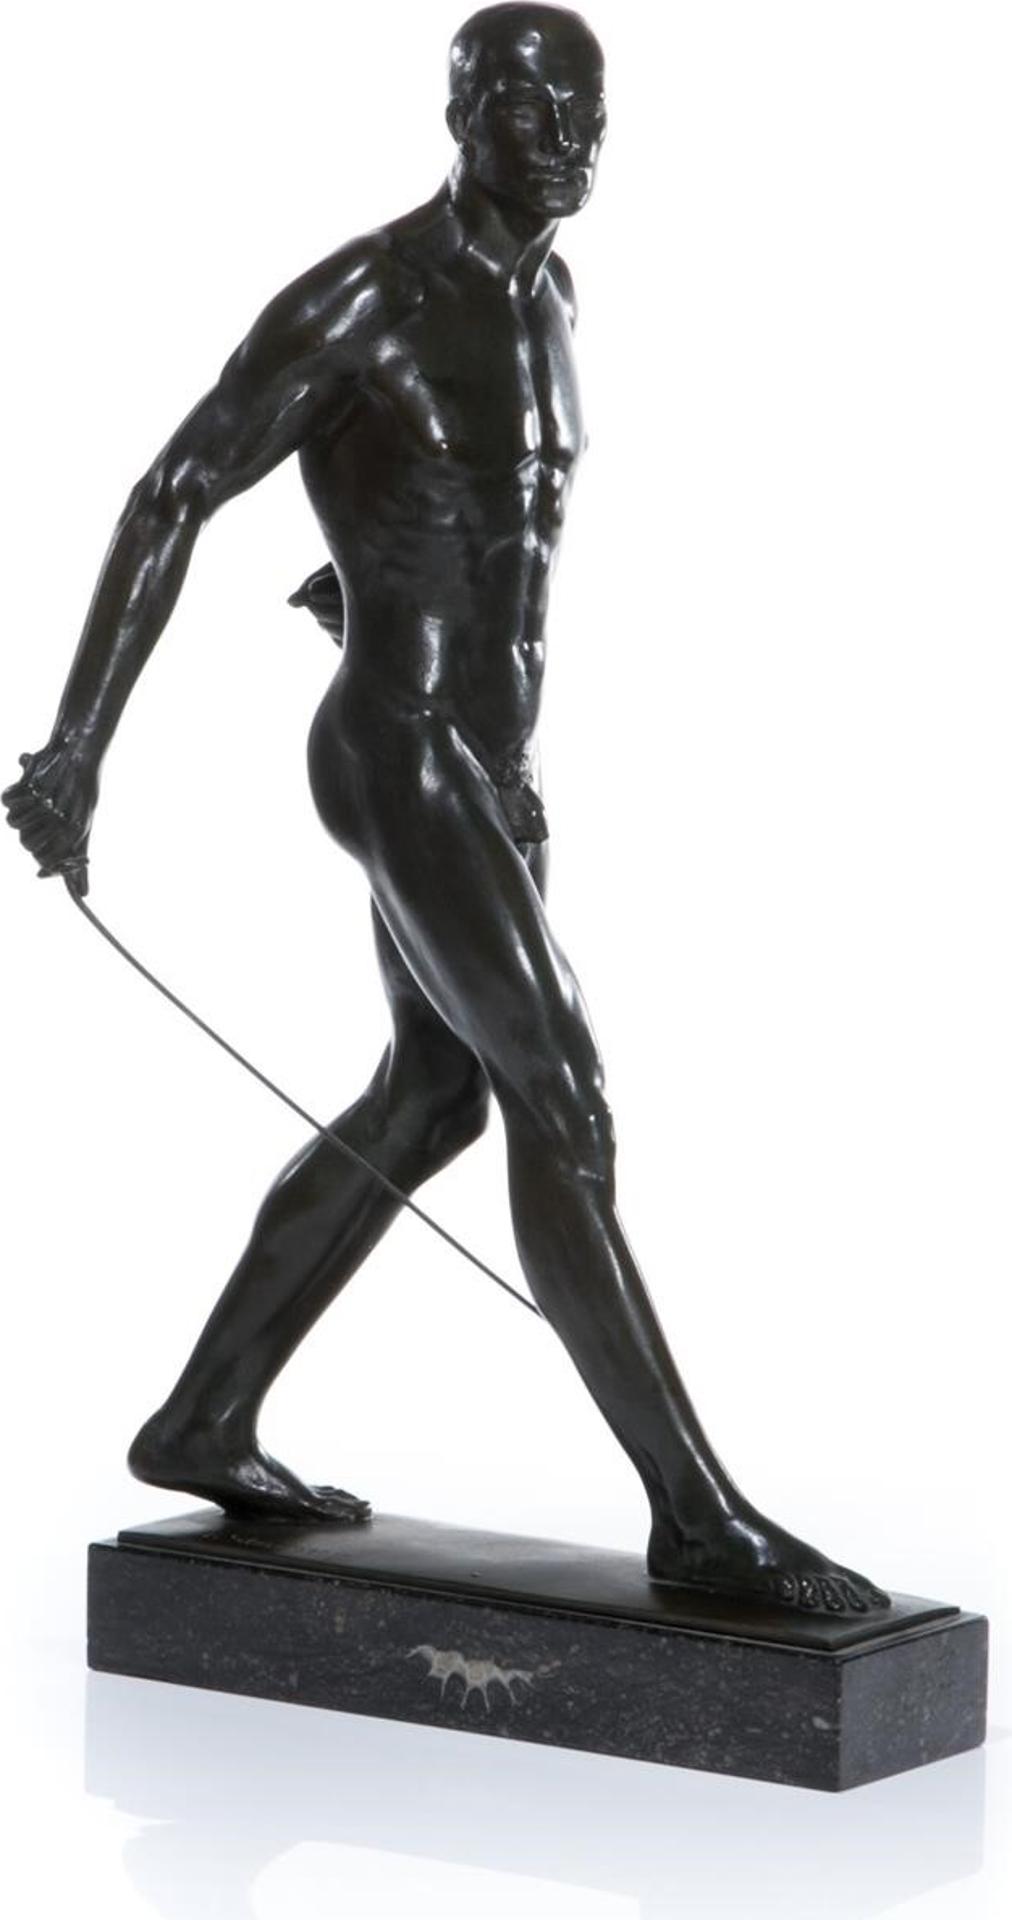 Reinhard Schnauder (1856-1923) - Late 19th / early 20th C. A bronze sculpture of a male nude figure in stride